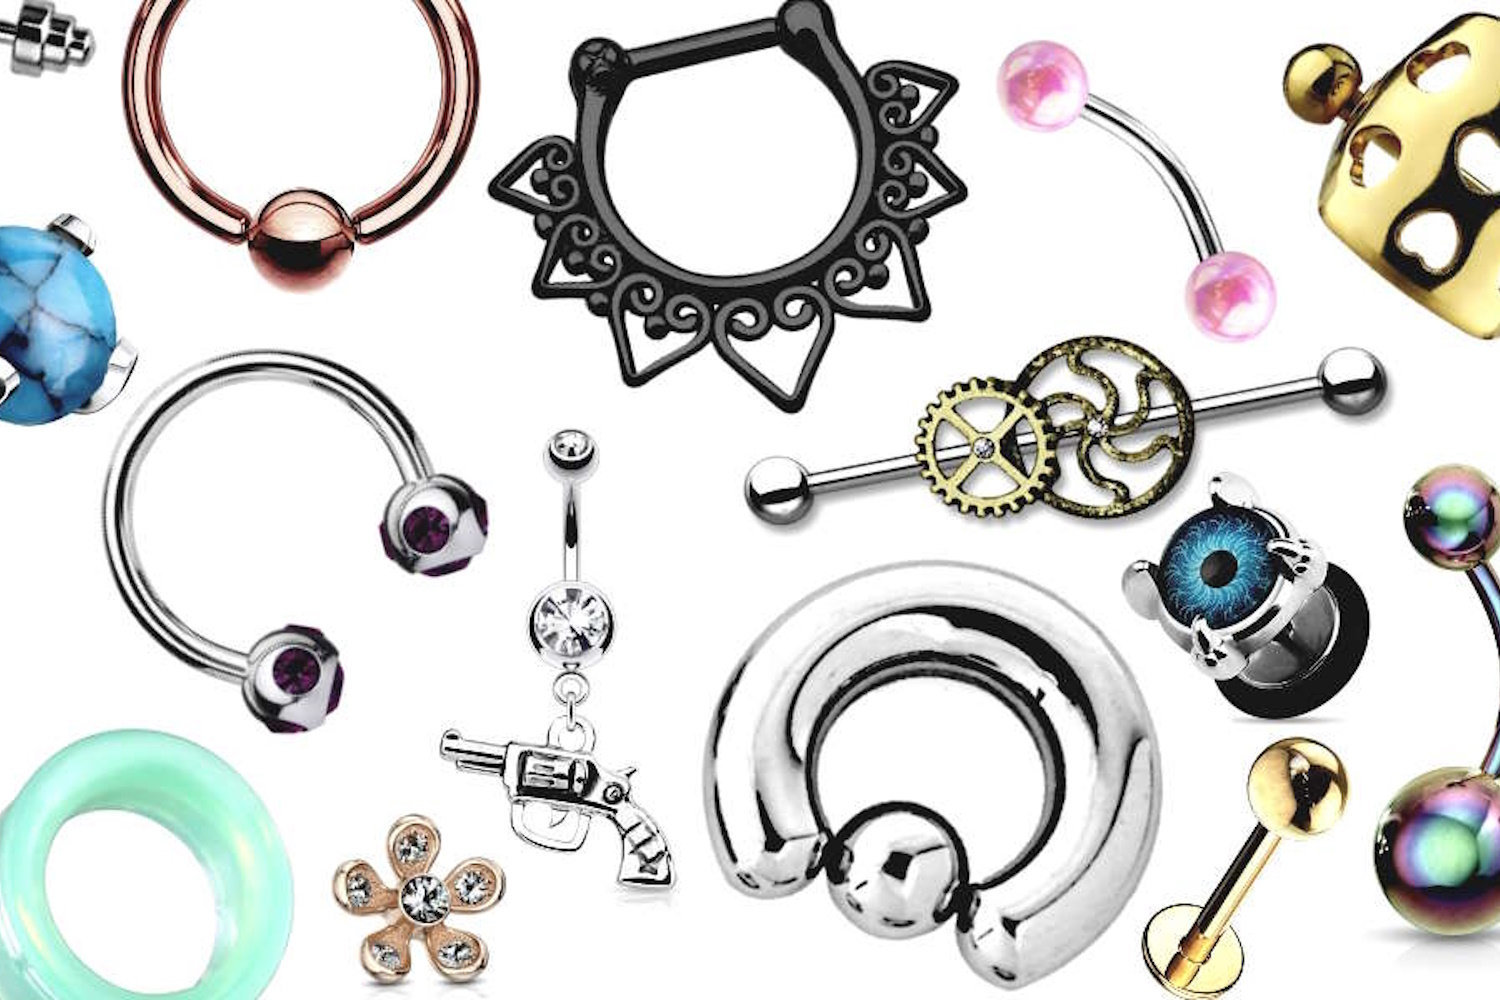 Several designs of body jewelry placed randomly on a white background.